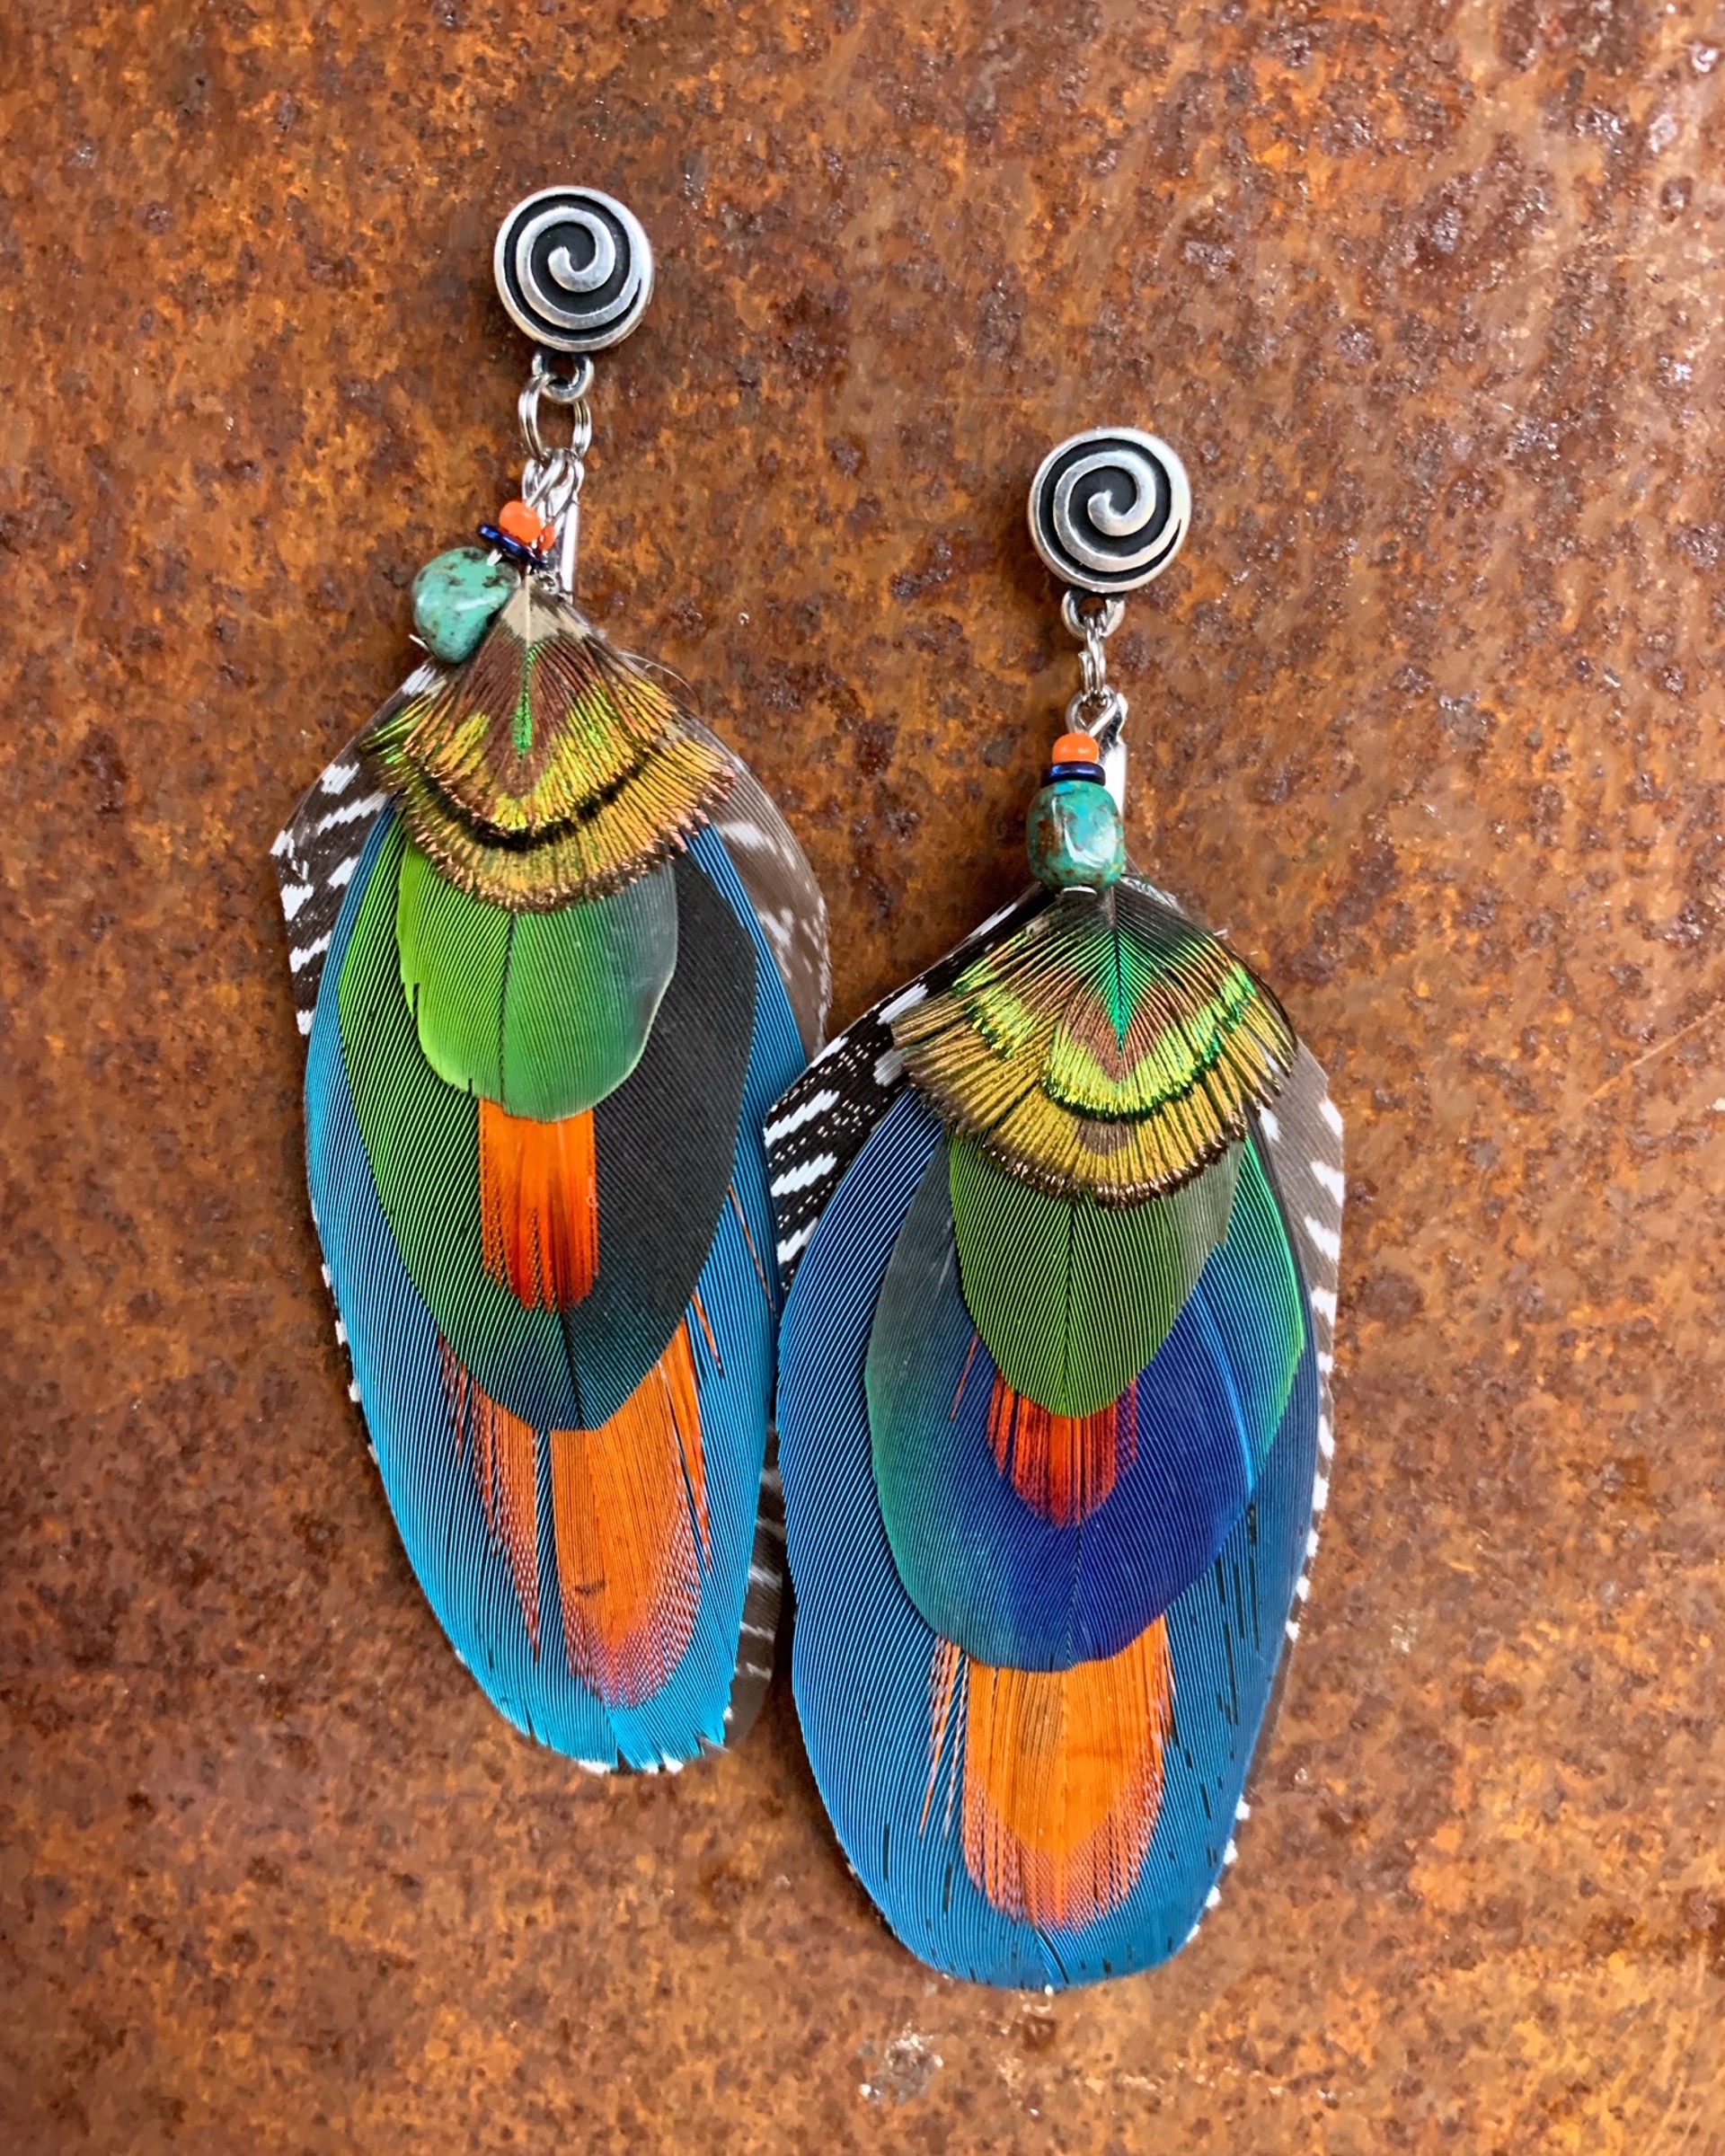 K812 Ethically Sourced Parrot Earrings by Kelly Ormsby